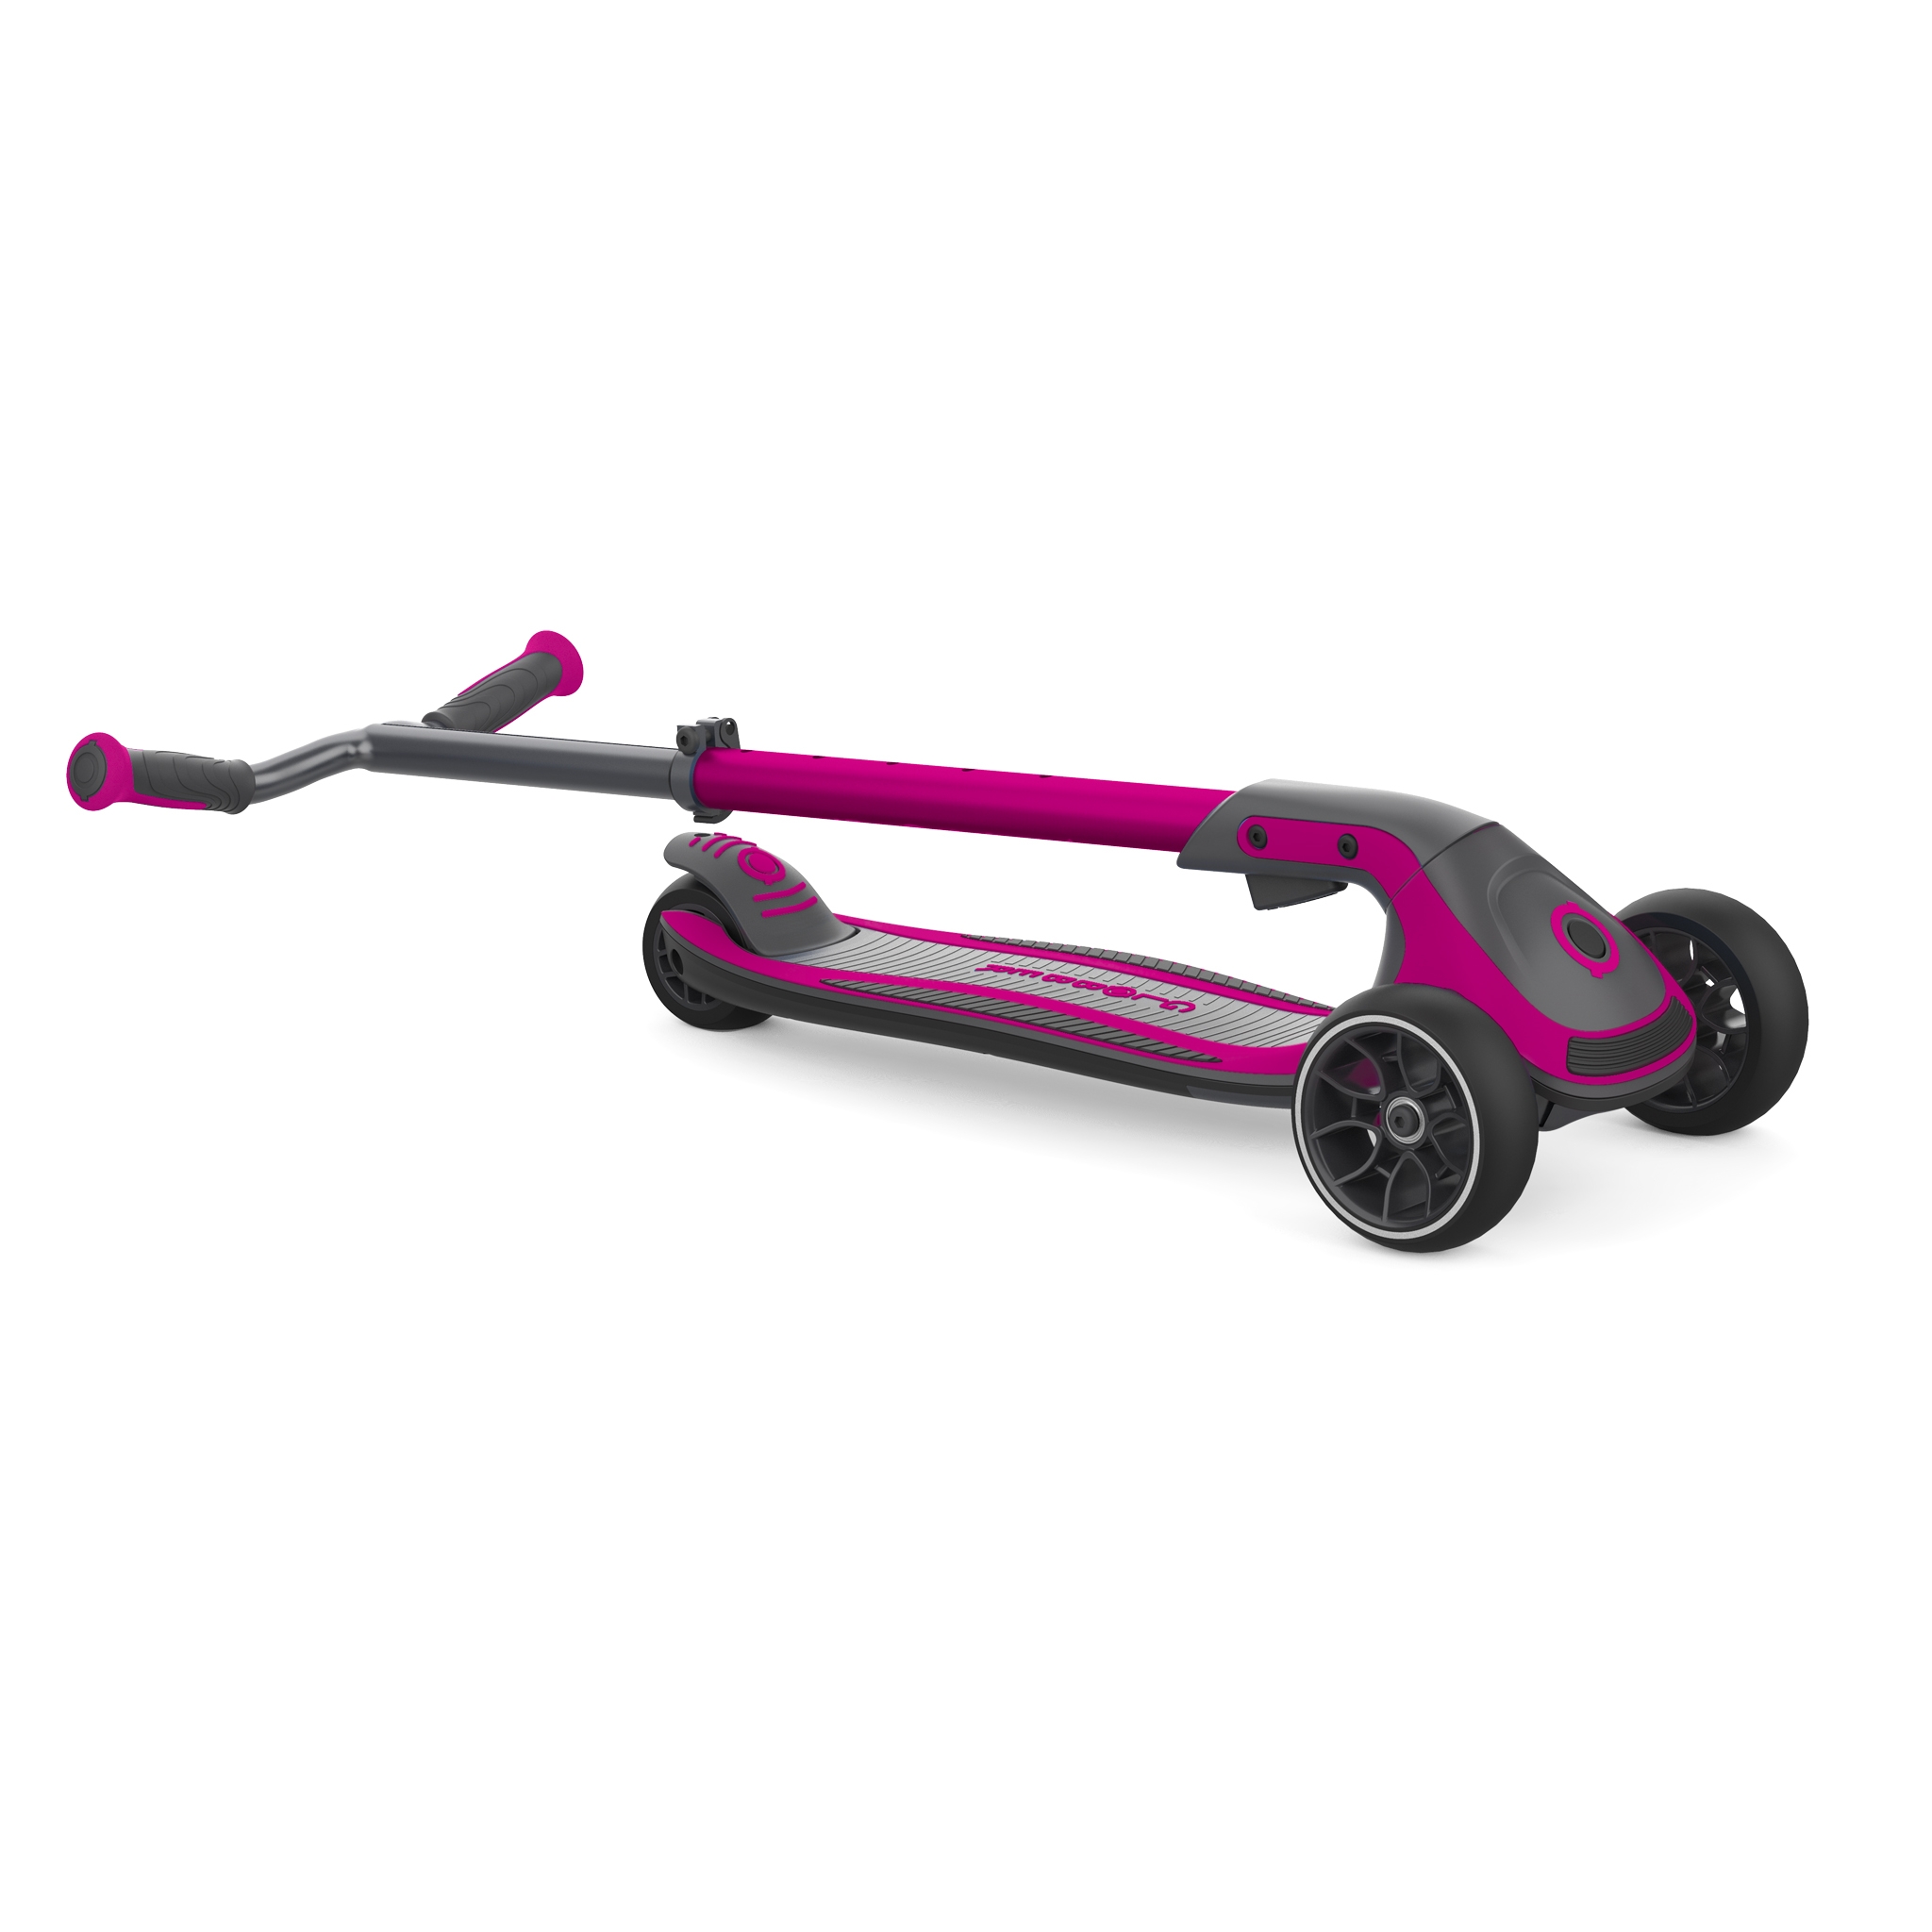 3 wheel foldable scooter for kids, teens and adults - Globber ULTIMUM 3